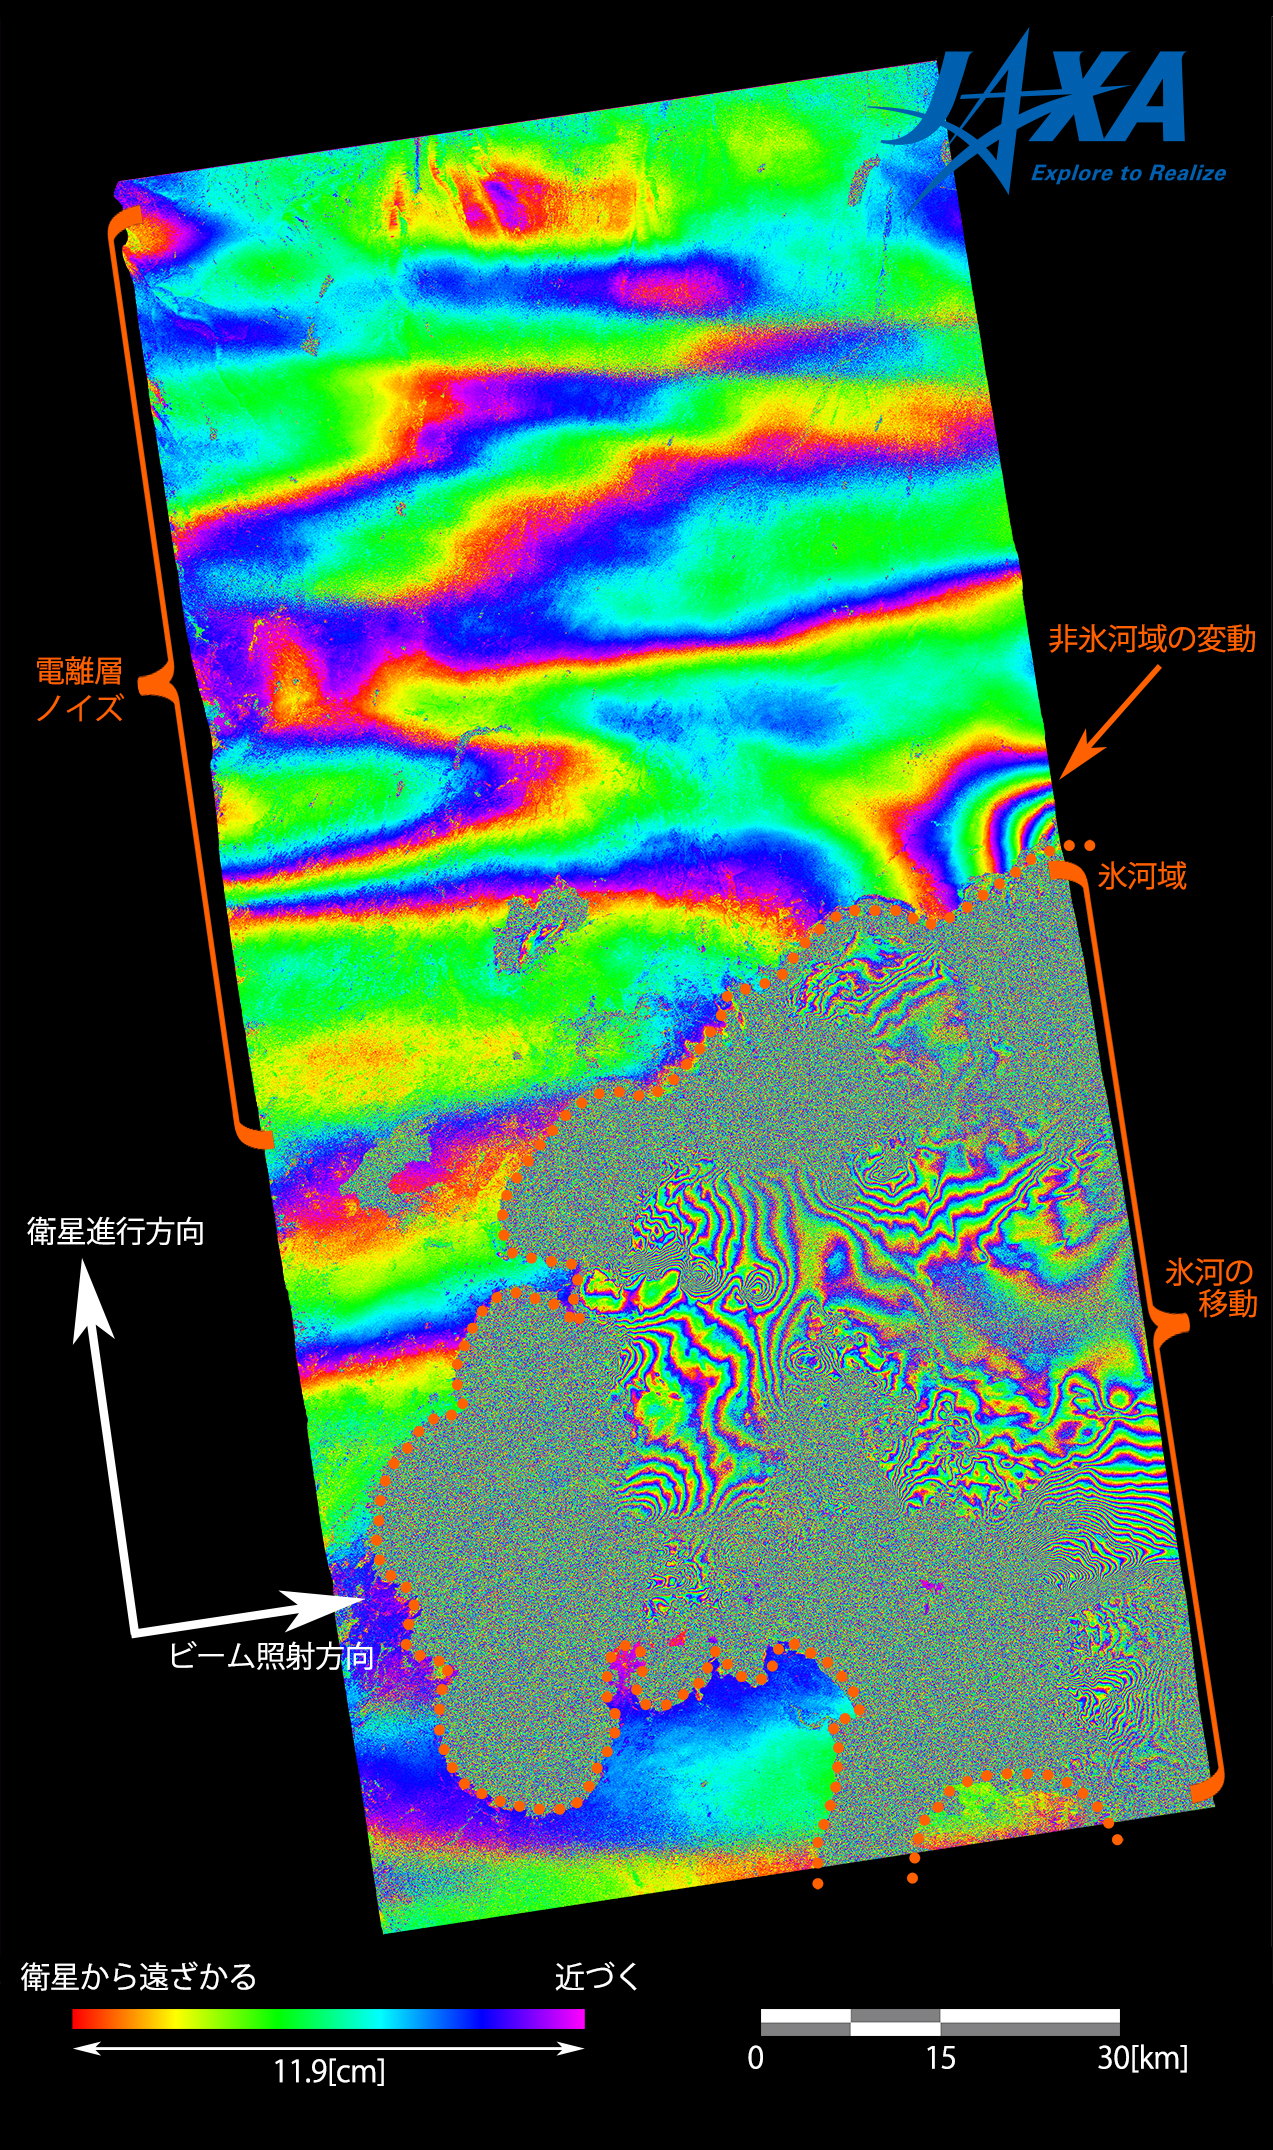 Fig. 4: Iinterferometric result from the imageries between August 28 and September 11, 2014.